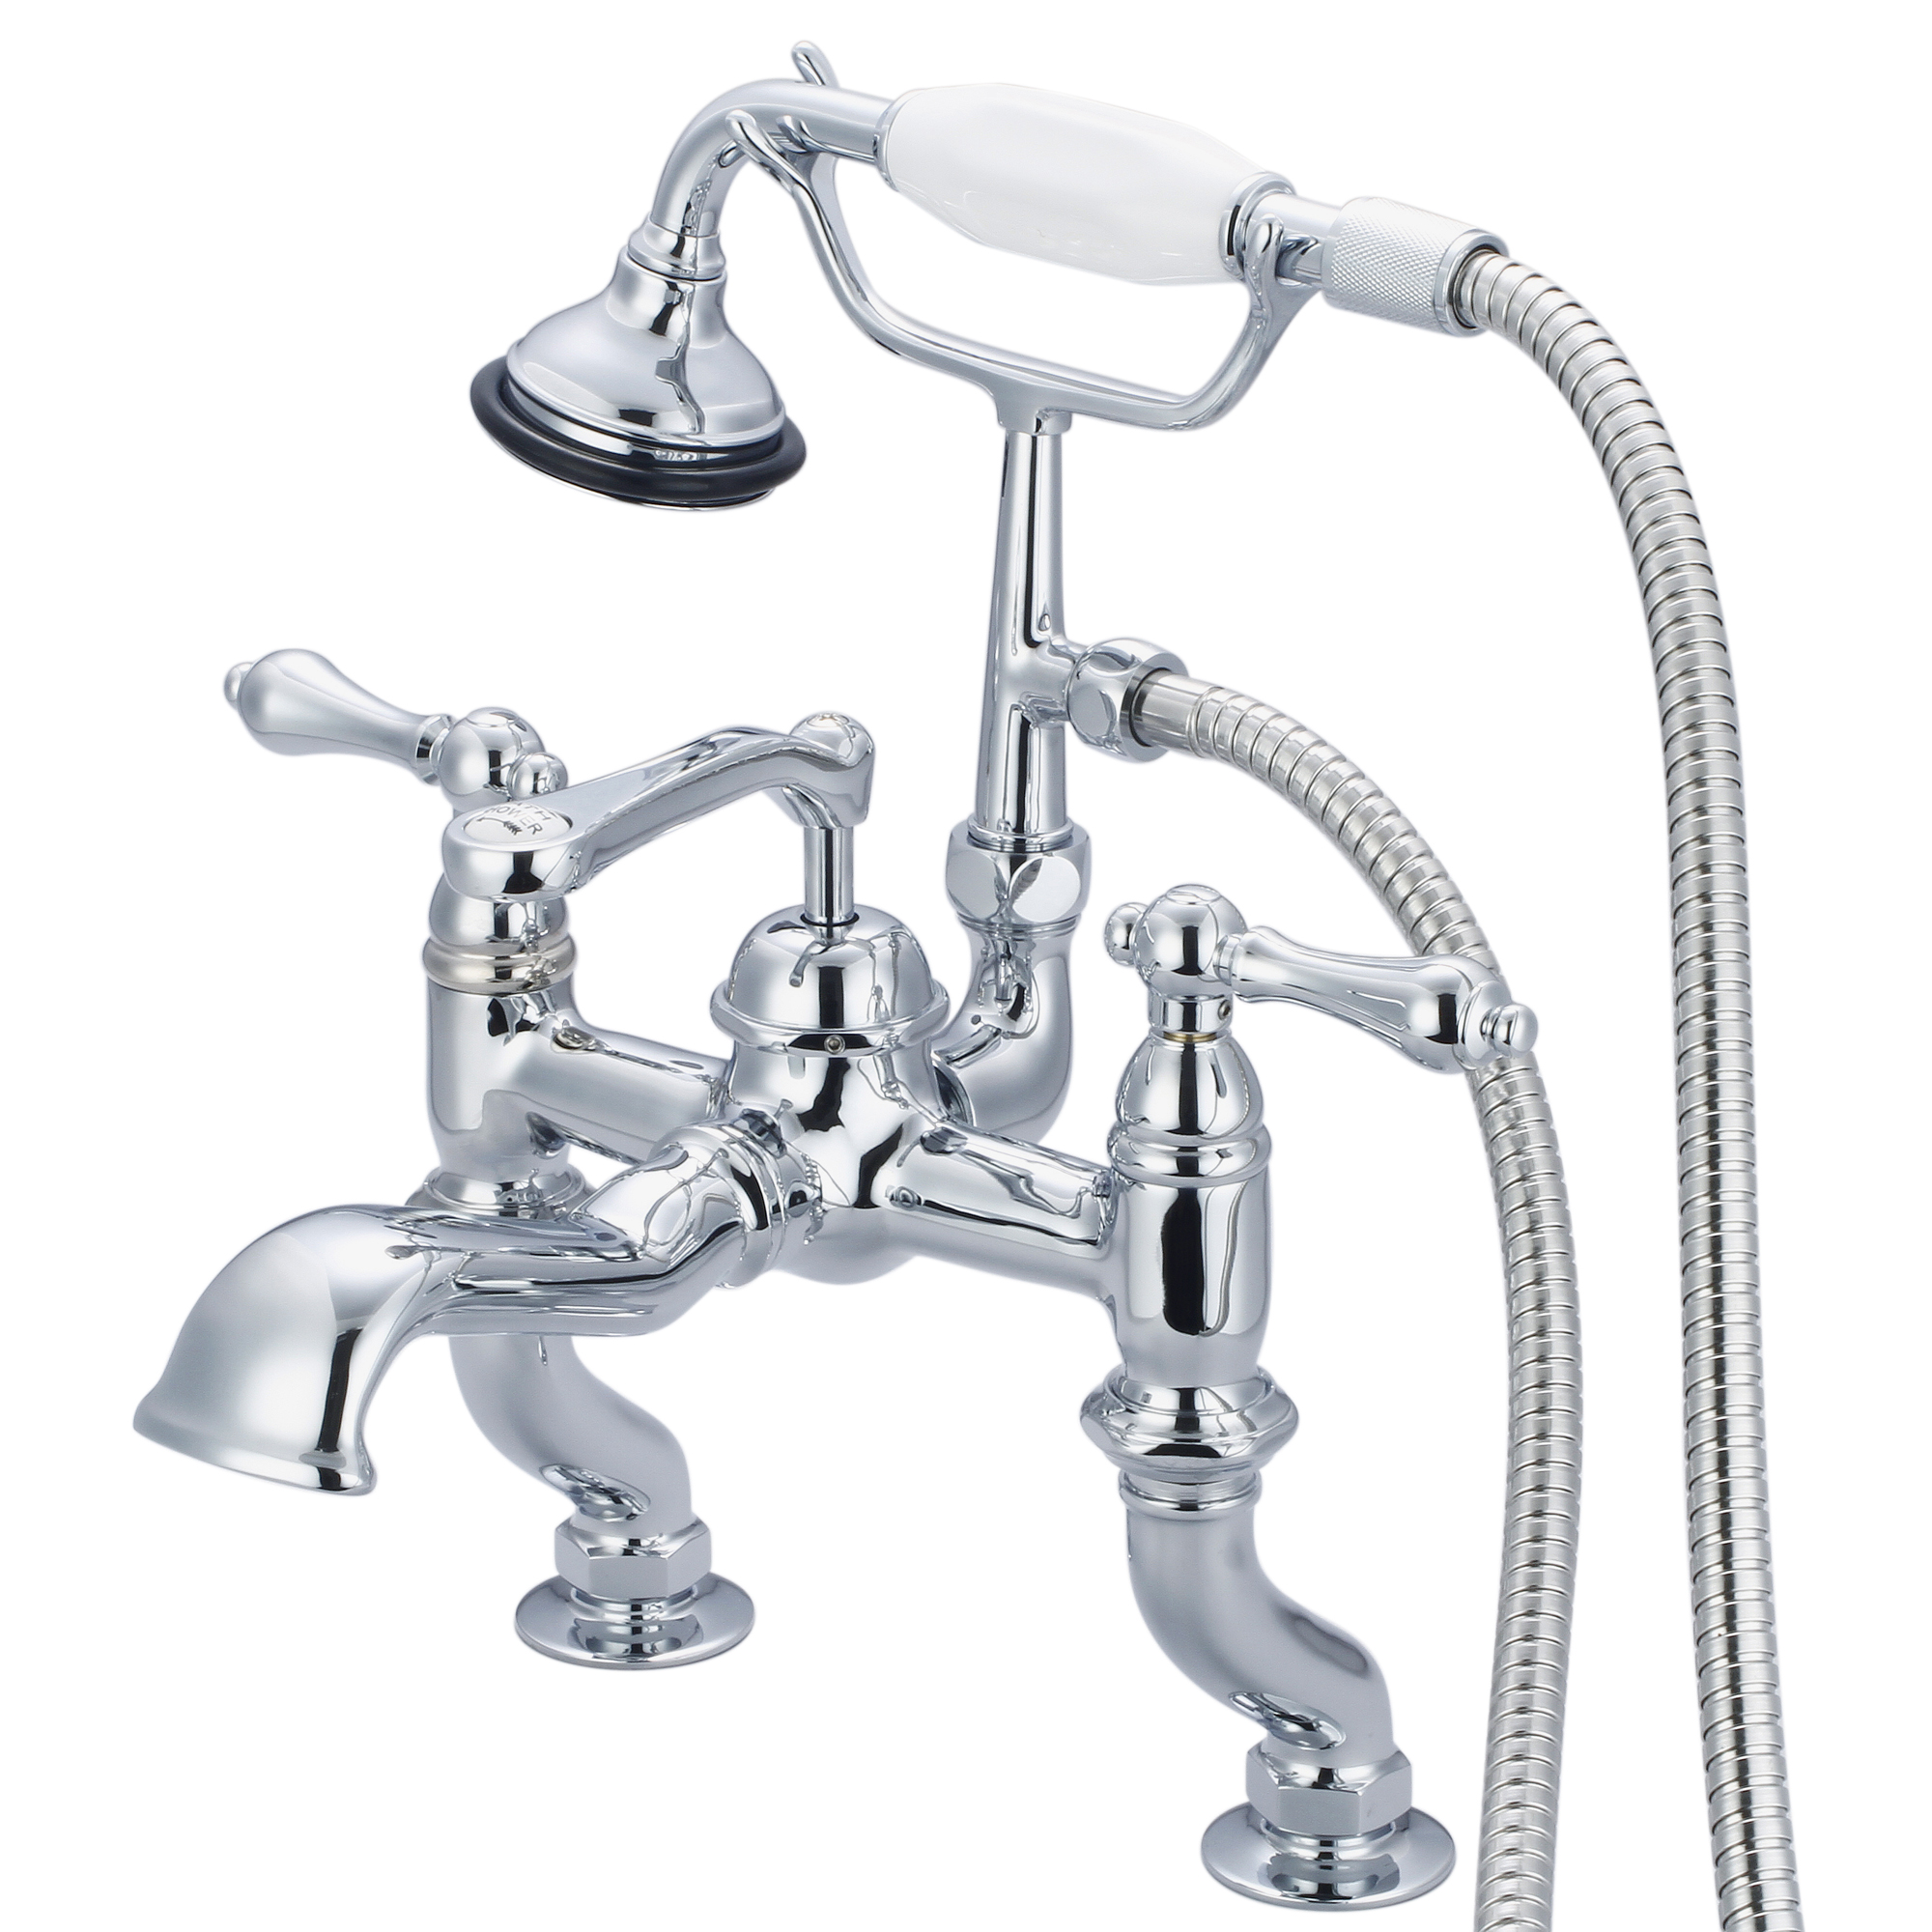 Vintage Classic Adjustable Center Deck Mount Tub Faucet With Handheld Shower in Chrome Finish With Metal Lever Handles Without Labels